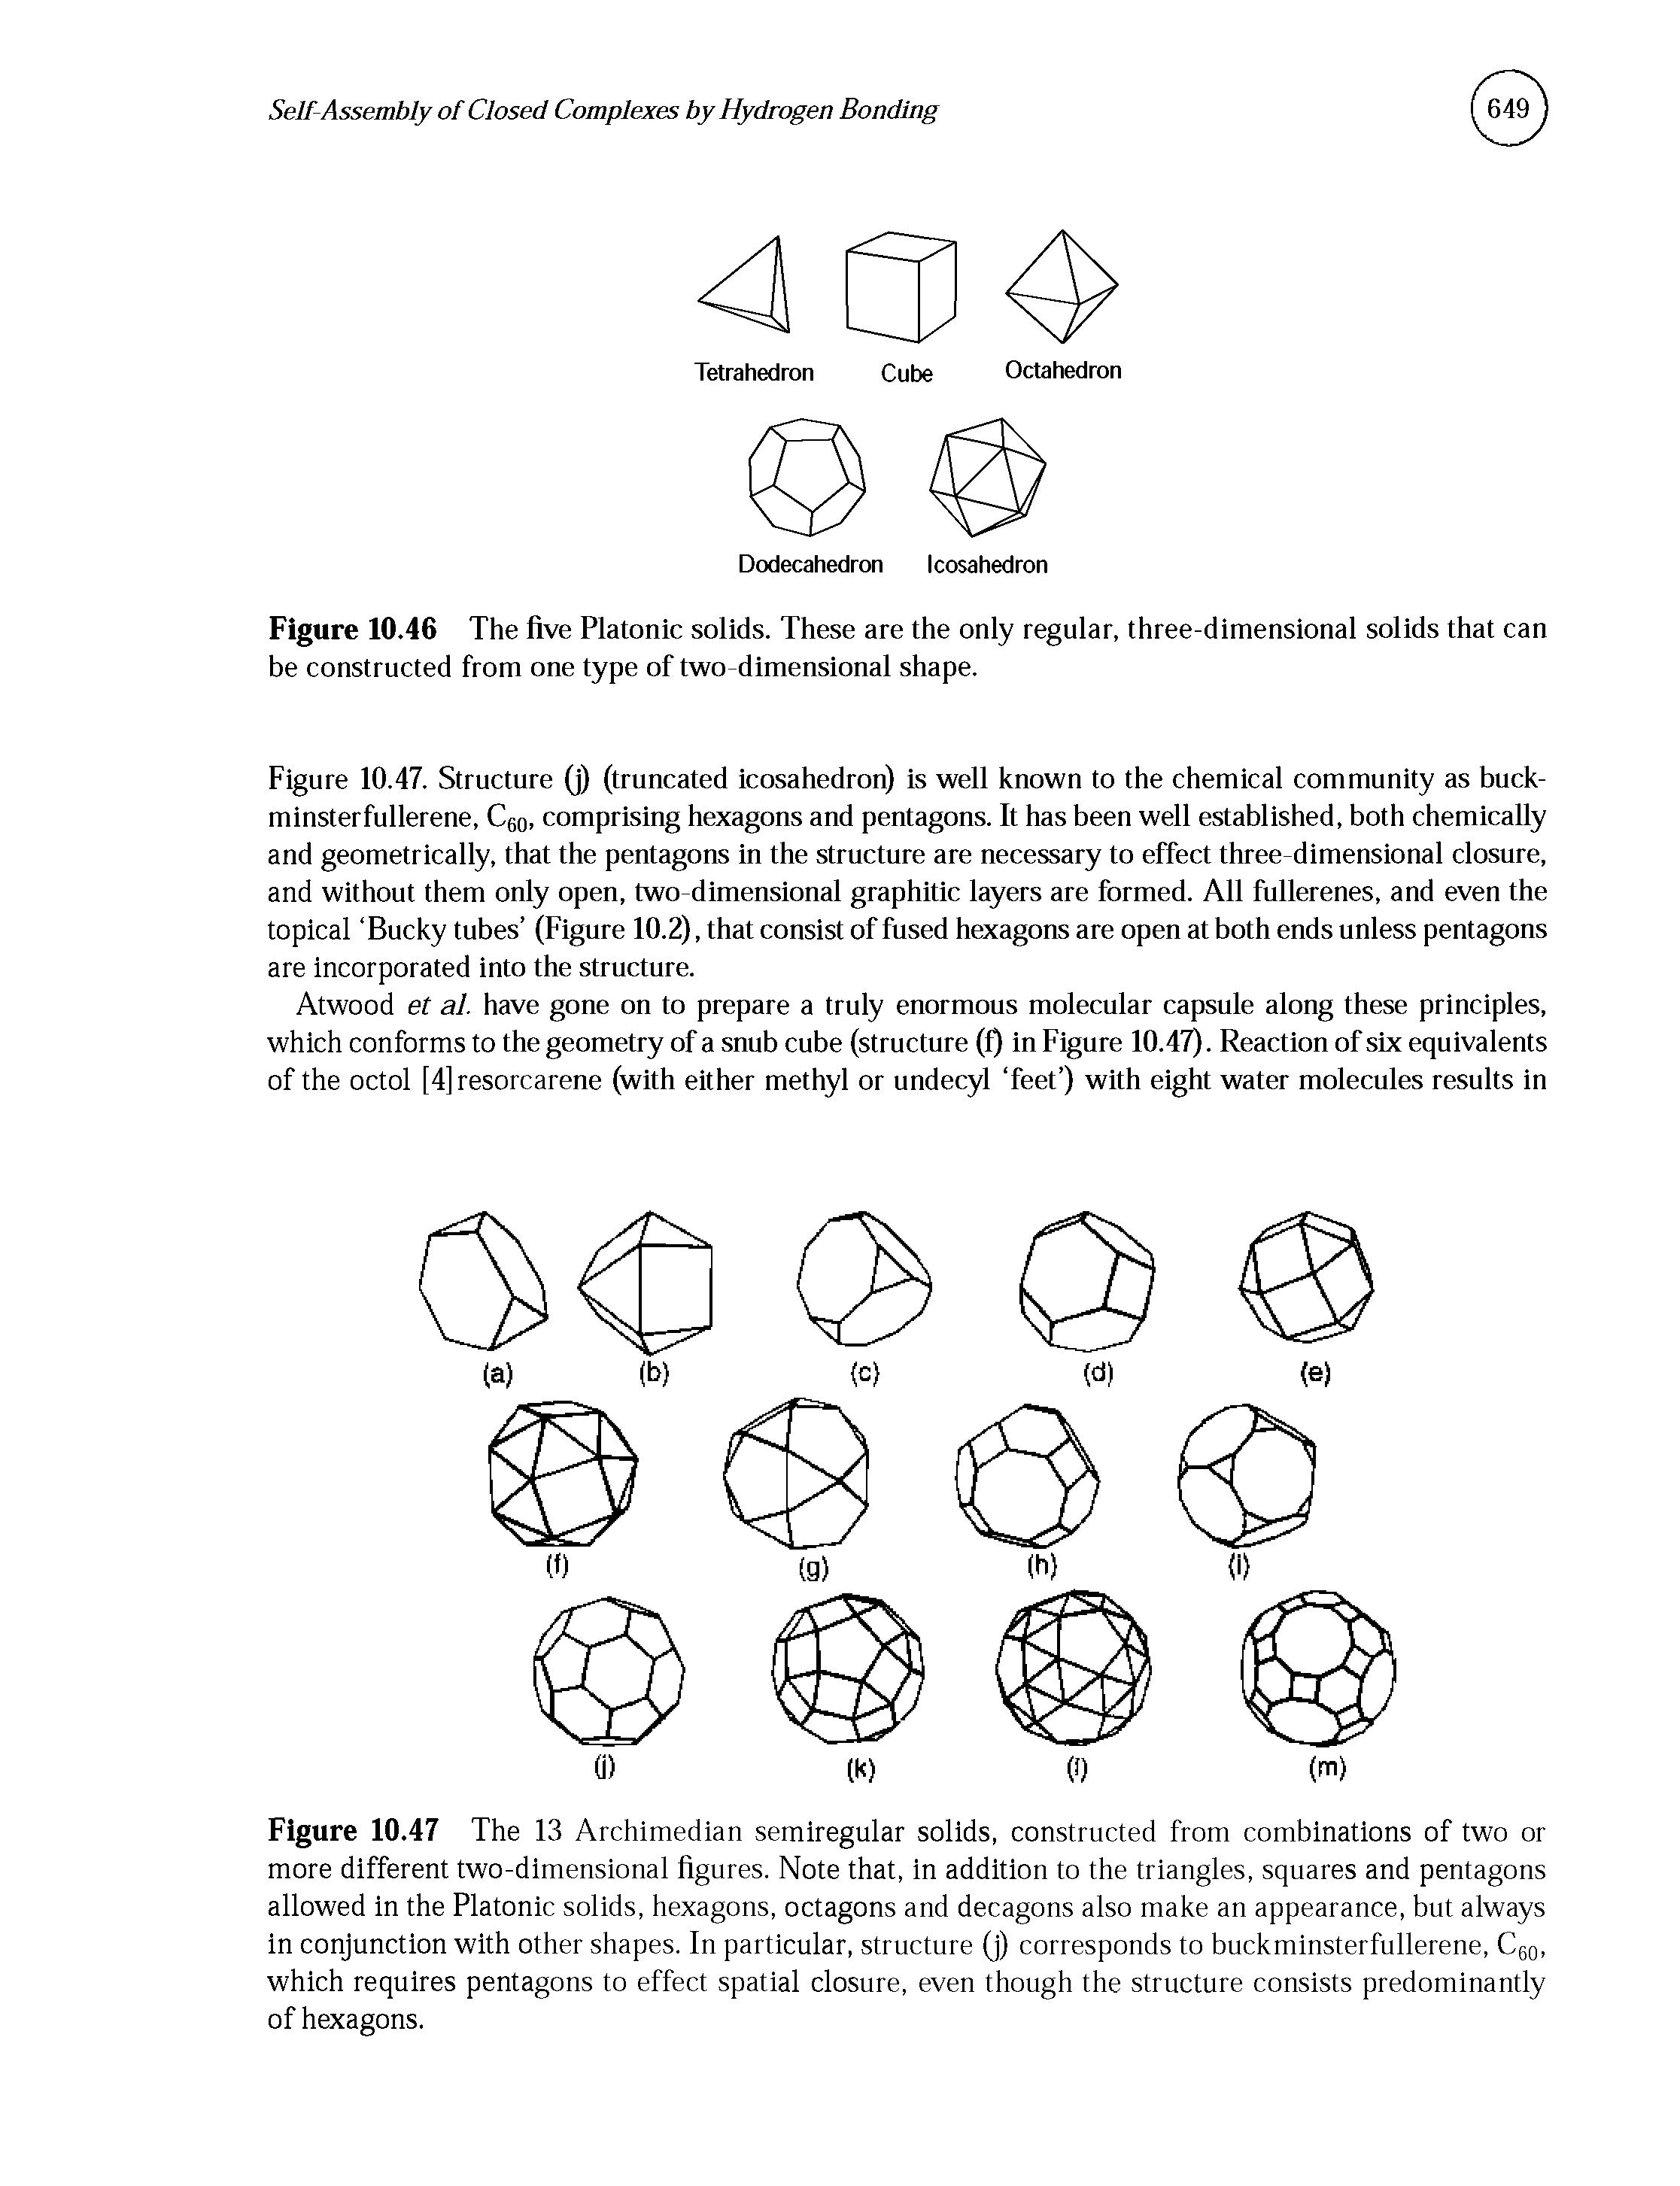 Figure 10.47 The 13 Archimedian semiregular solids, constructed from combinations of two or more different two-dimensional figures. Note that, in addition to the triangles, squares and pentagons allowed in the Platonic solids, hexagons, octagons and decagons also make an appearance, but always in conjunction with other shapes. In particular, structure (j) corresponds to buckminsterfullerene, C60, which requires pentagons to effect spatial closure, even though the structure consists predominantly of hexagons.